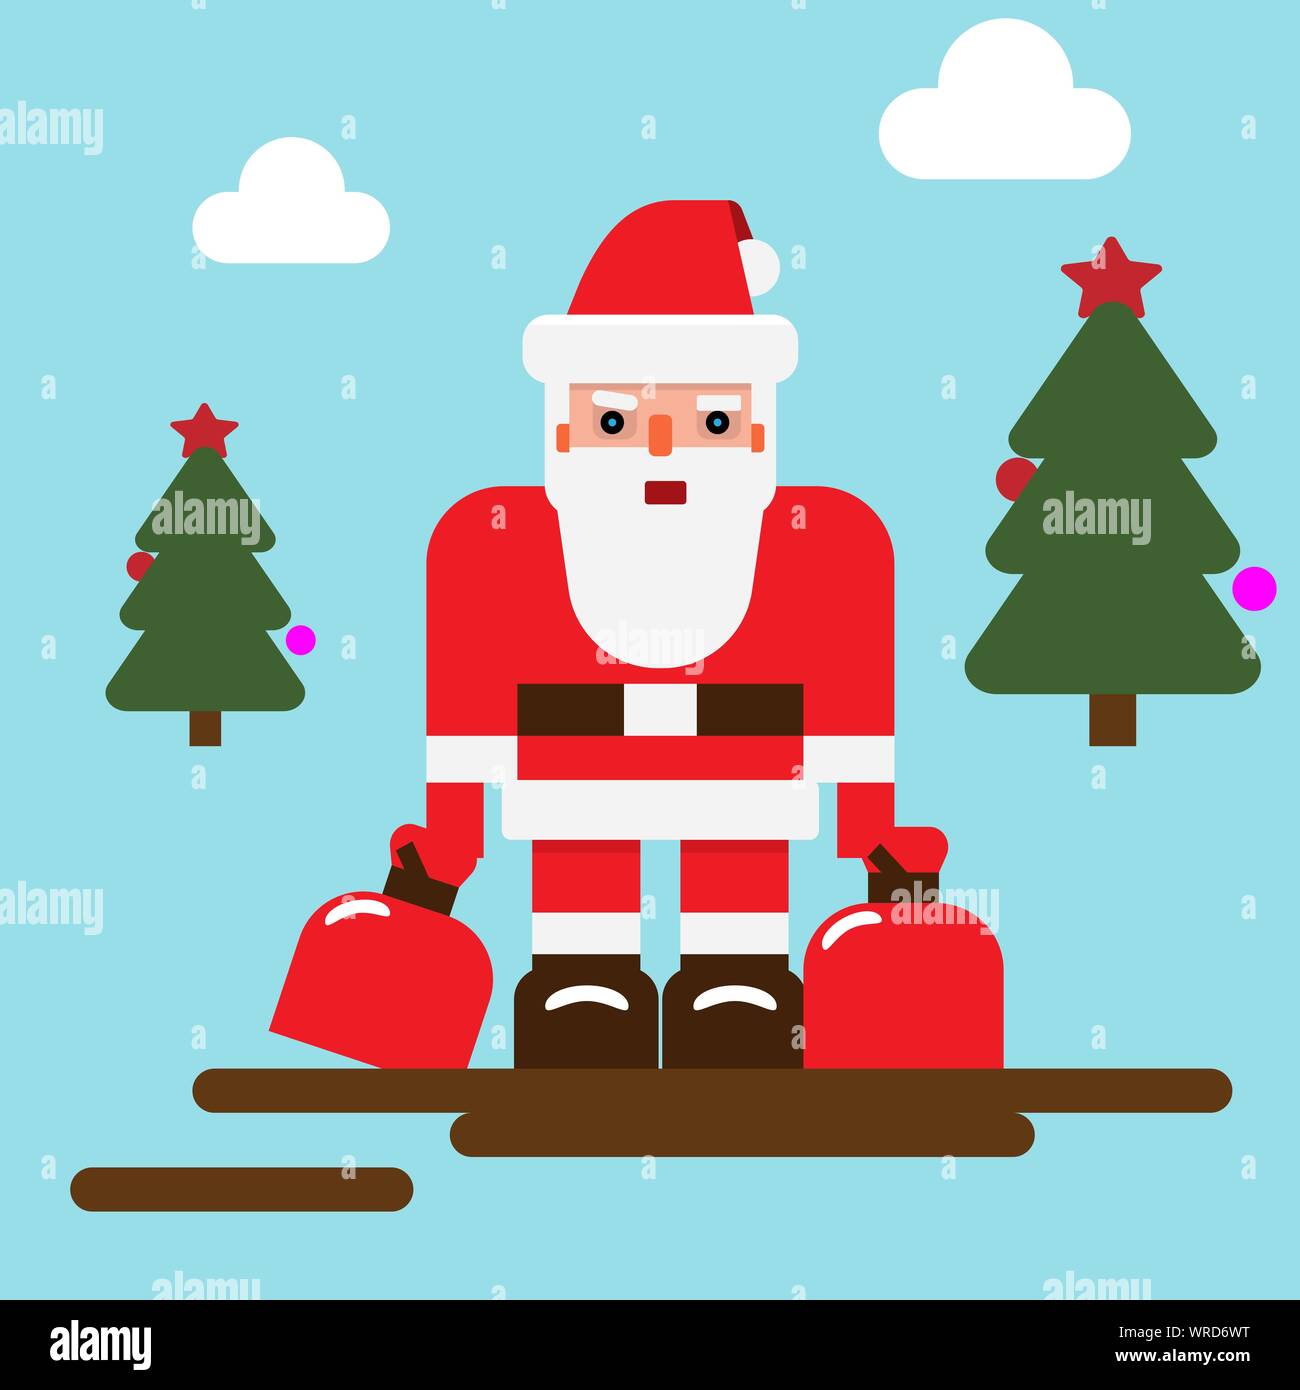 Santa Claus character with minimalistic style. Solid and flat color design. Vector illustration. Stock Vector